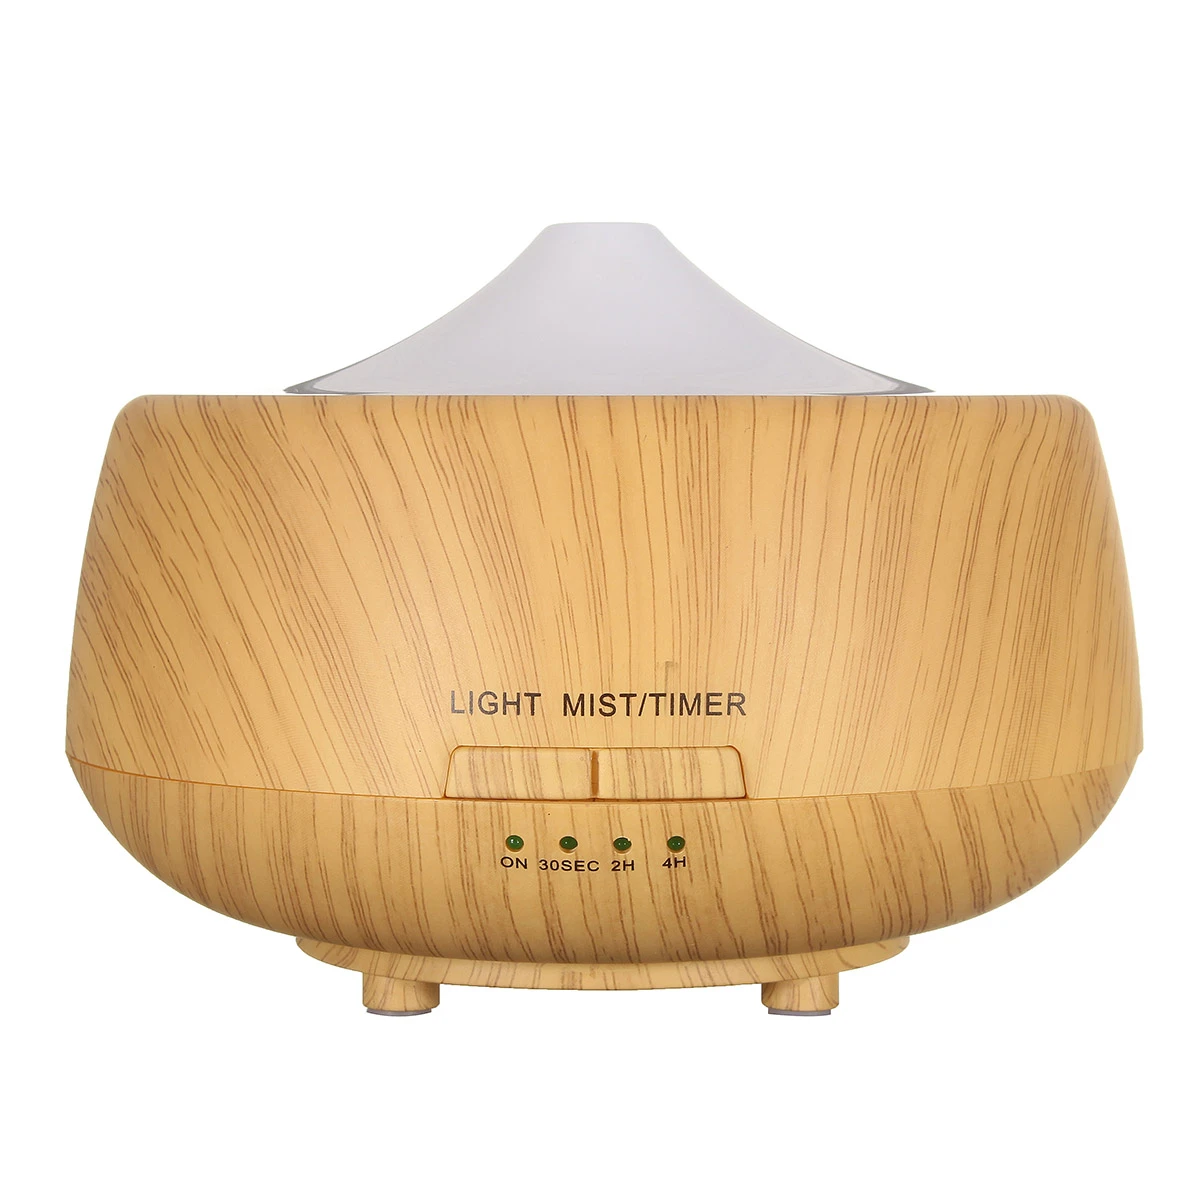 Ultrasonic Color-changing Wood Grain LED Aroma Diffuser Humidifier Aromatherapy Spa Essential Oil